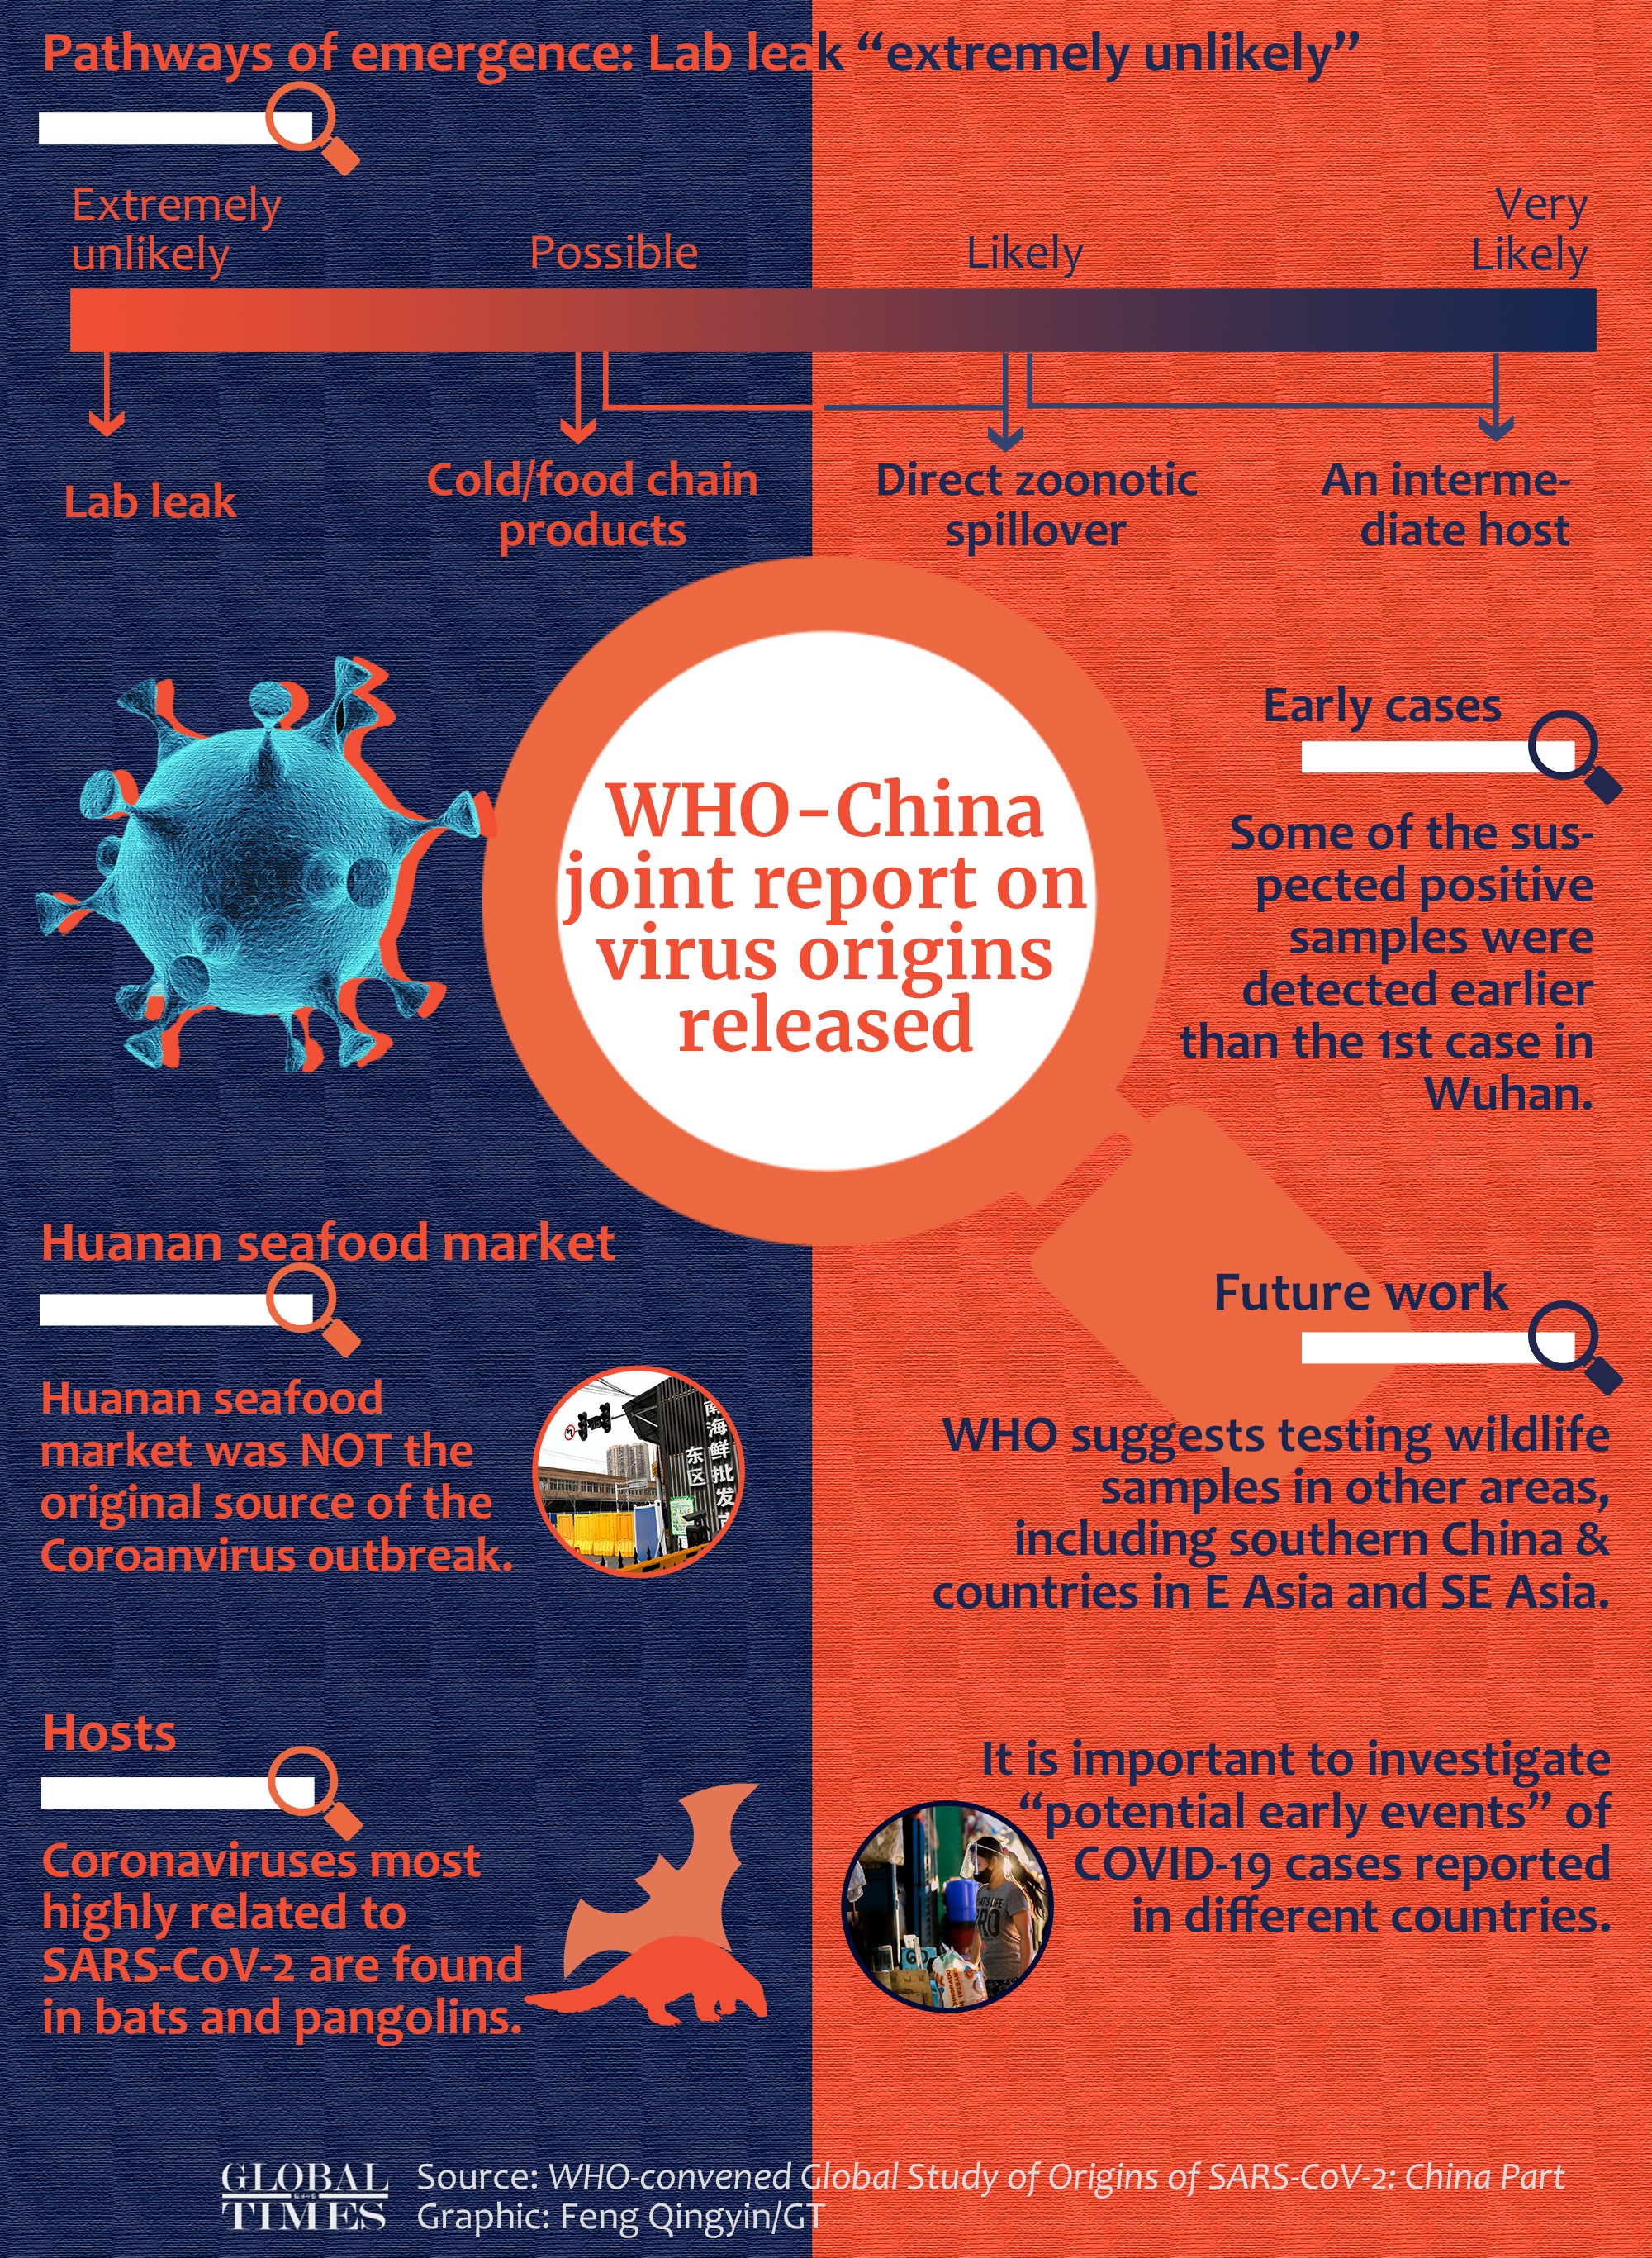 Highlights from WHO-China joint report on coronavirus origins: -A lab leak was extremely unlikely -Huanan seafood market was NOT the original source of the outbreak -It's important to investigate potential early events of COVID-19 cases in different countries Graphic: Feng Qingyin/GT